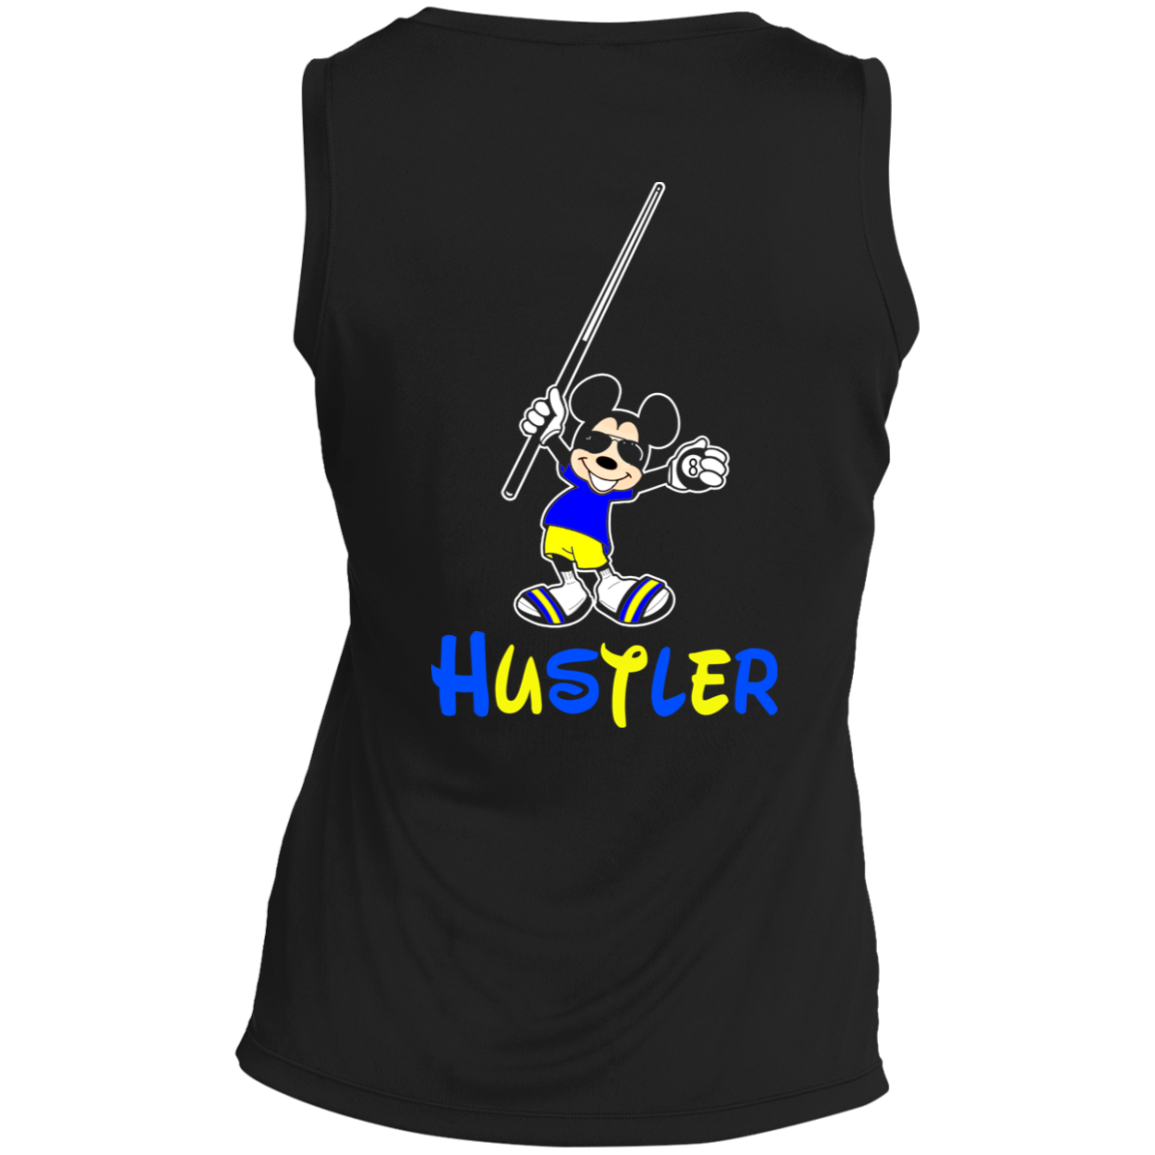 The GHOATS Custom Design #20. Look at the back. Hustle Mouse. Mickey Mouse Fan Art. Ladies' 100% polyester interlock with PosiCharge technology